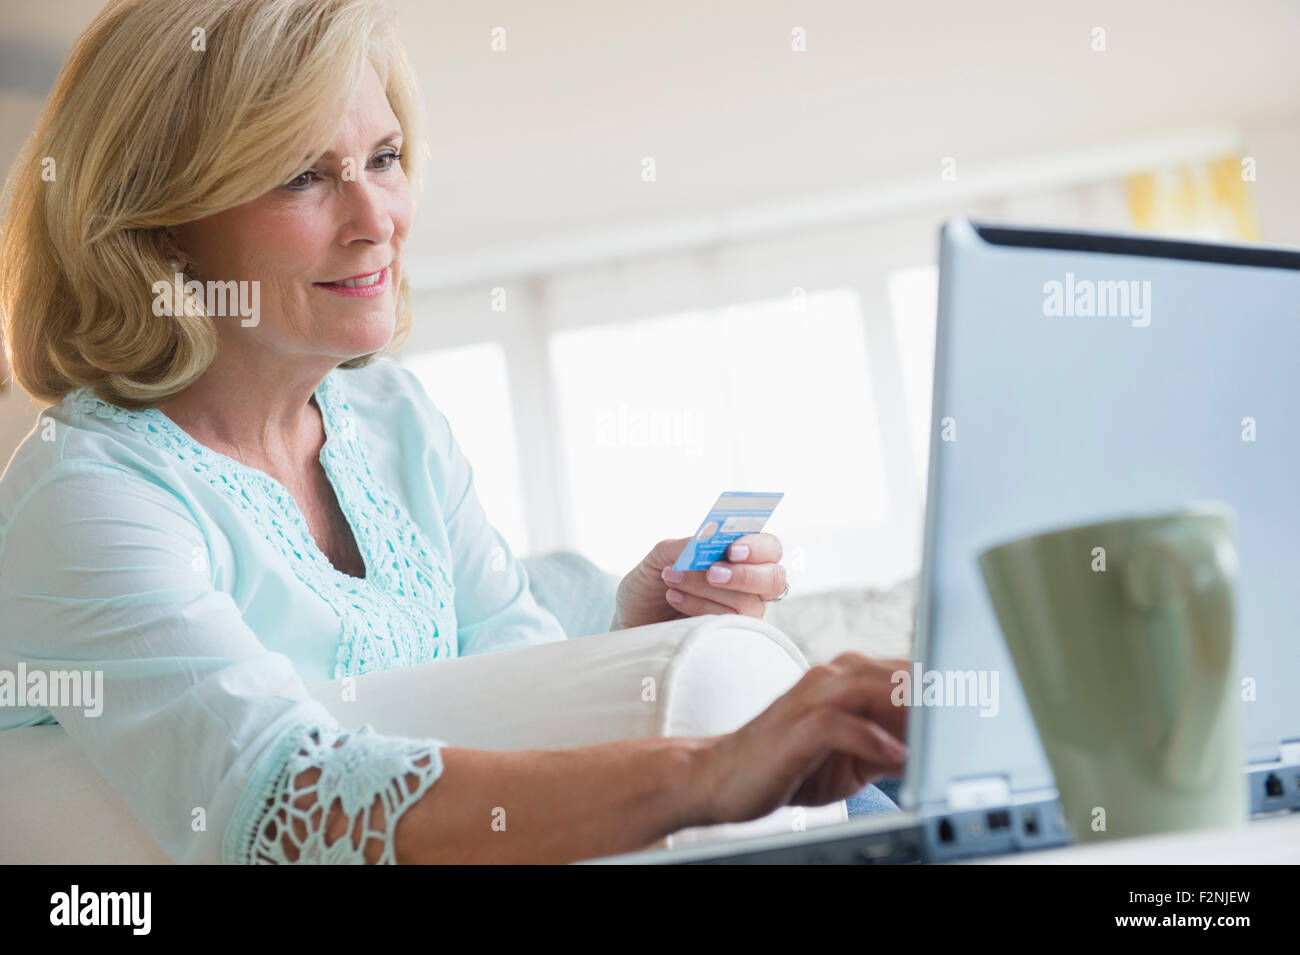 Caucasian woman shopping online with laptop Stock Photo